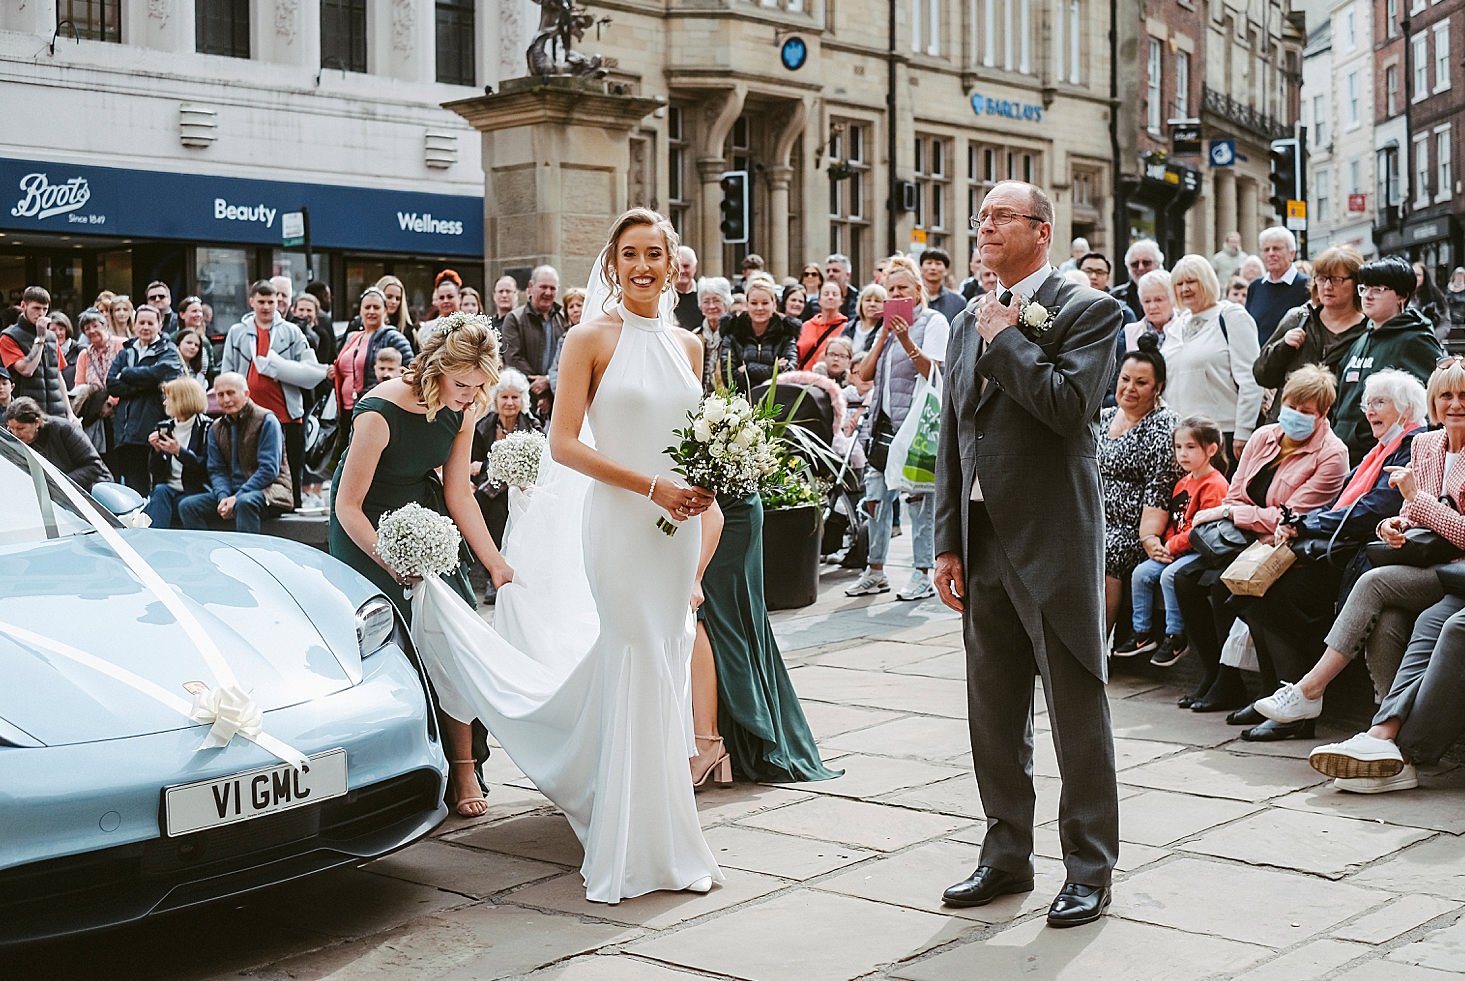 A crowd formed in Durham as Briony appeared on the dawn of her big day.

#wedding #weddings #weddingday #photo #photography #photographer #weddingphotography #weddingphotographer #northeastphotography #northeastwedding #northeastweddings #northeastwe